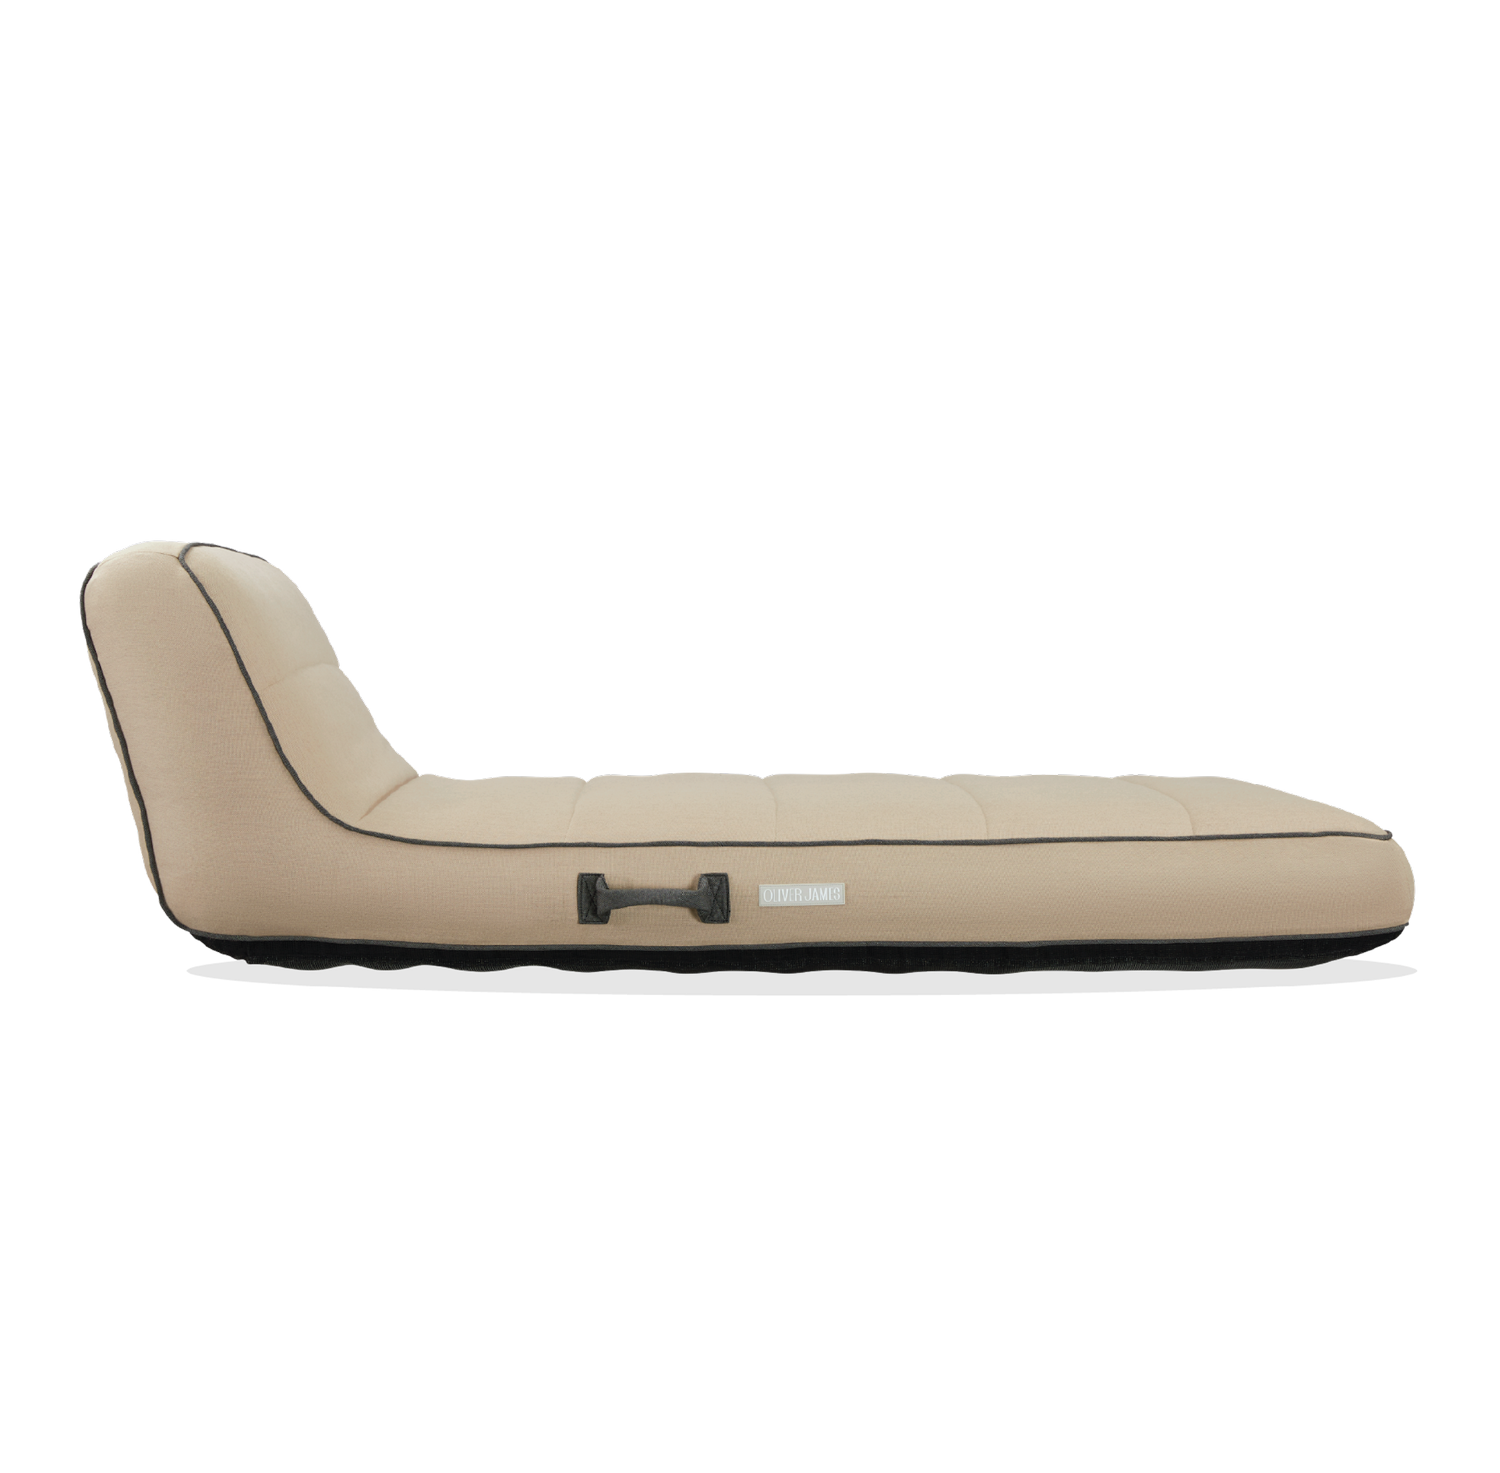 The side profile and shape of a brown tan colored pool float for adults.